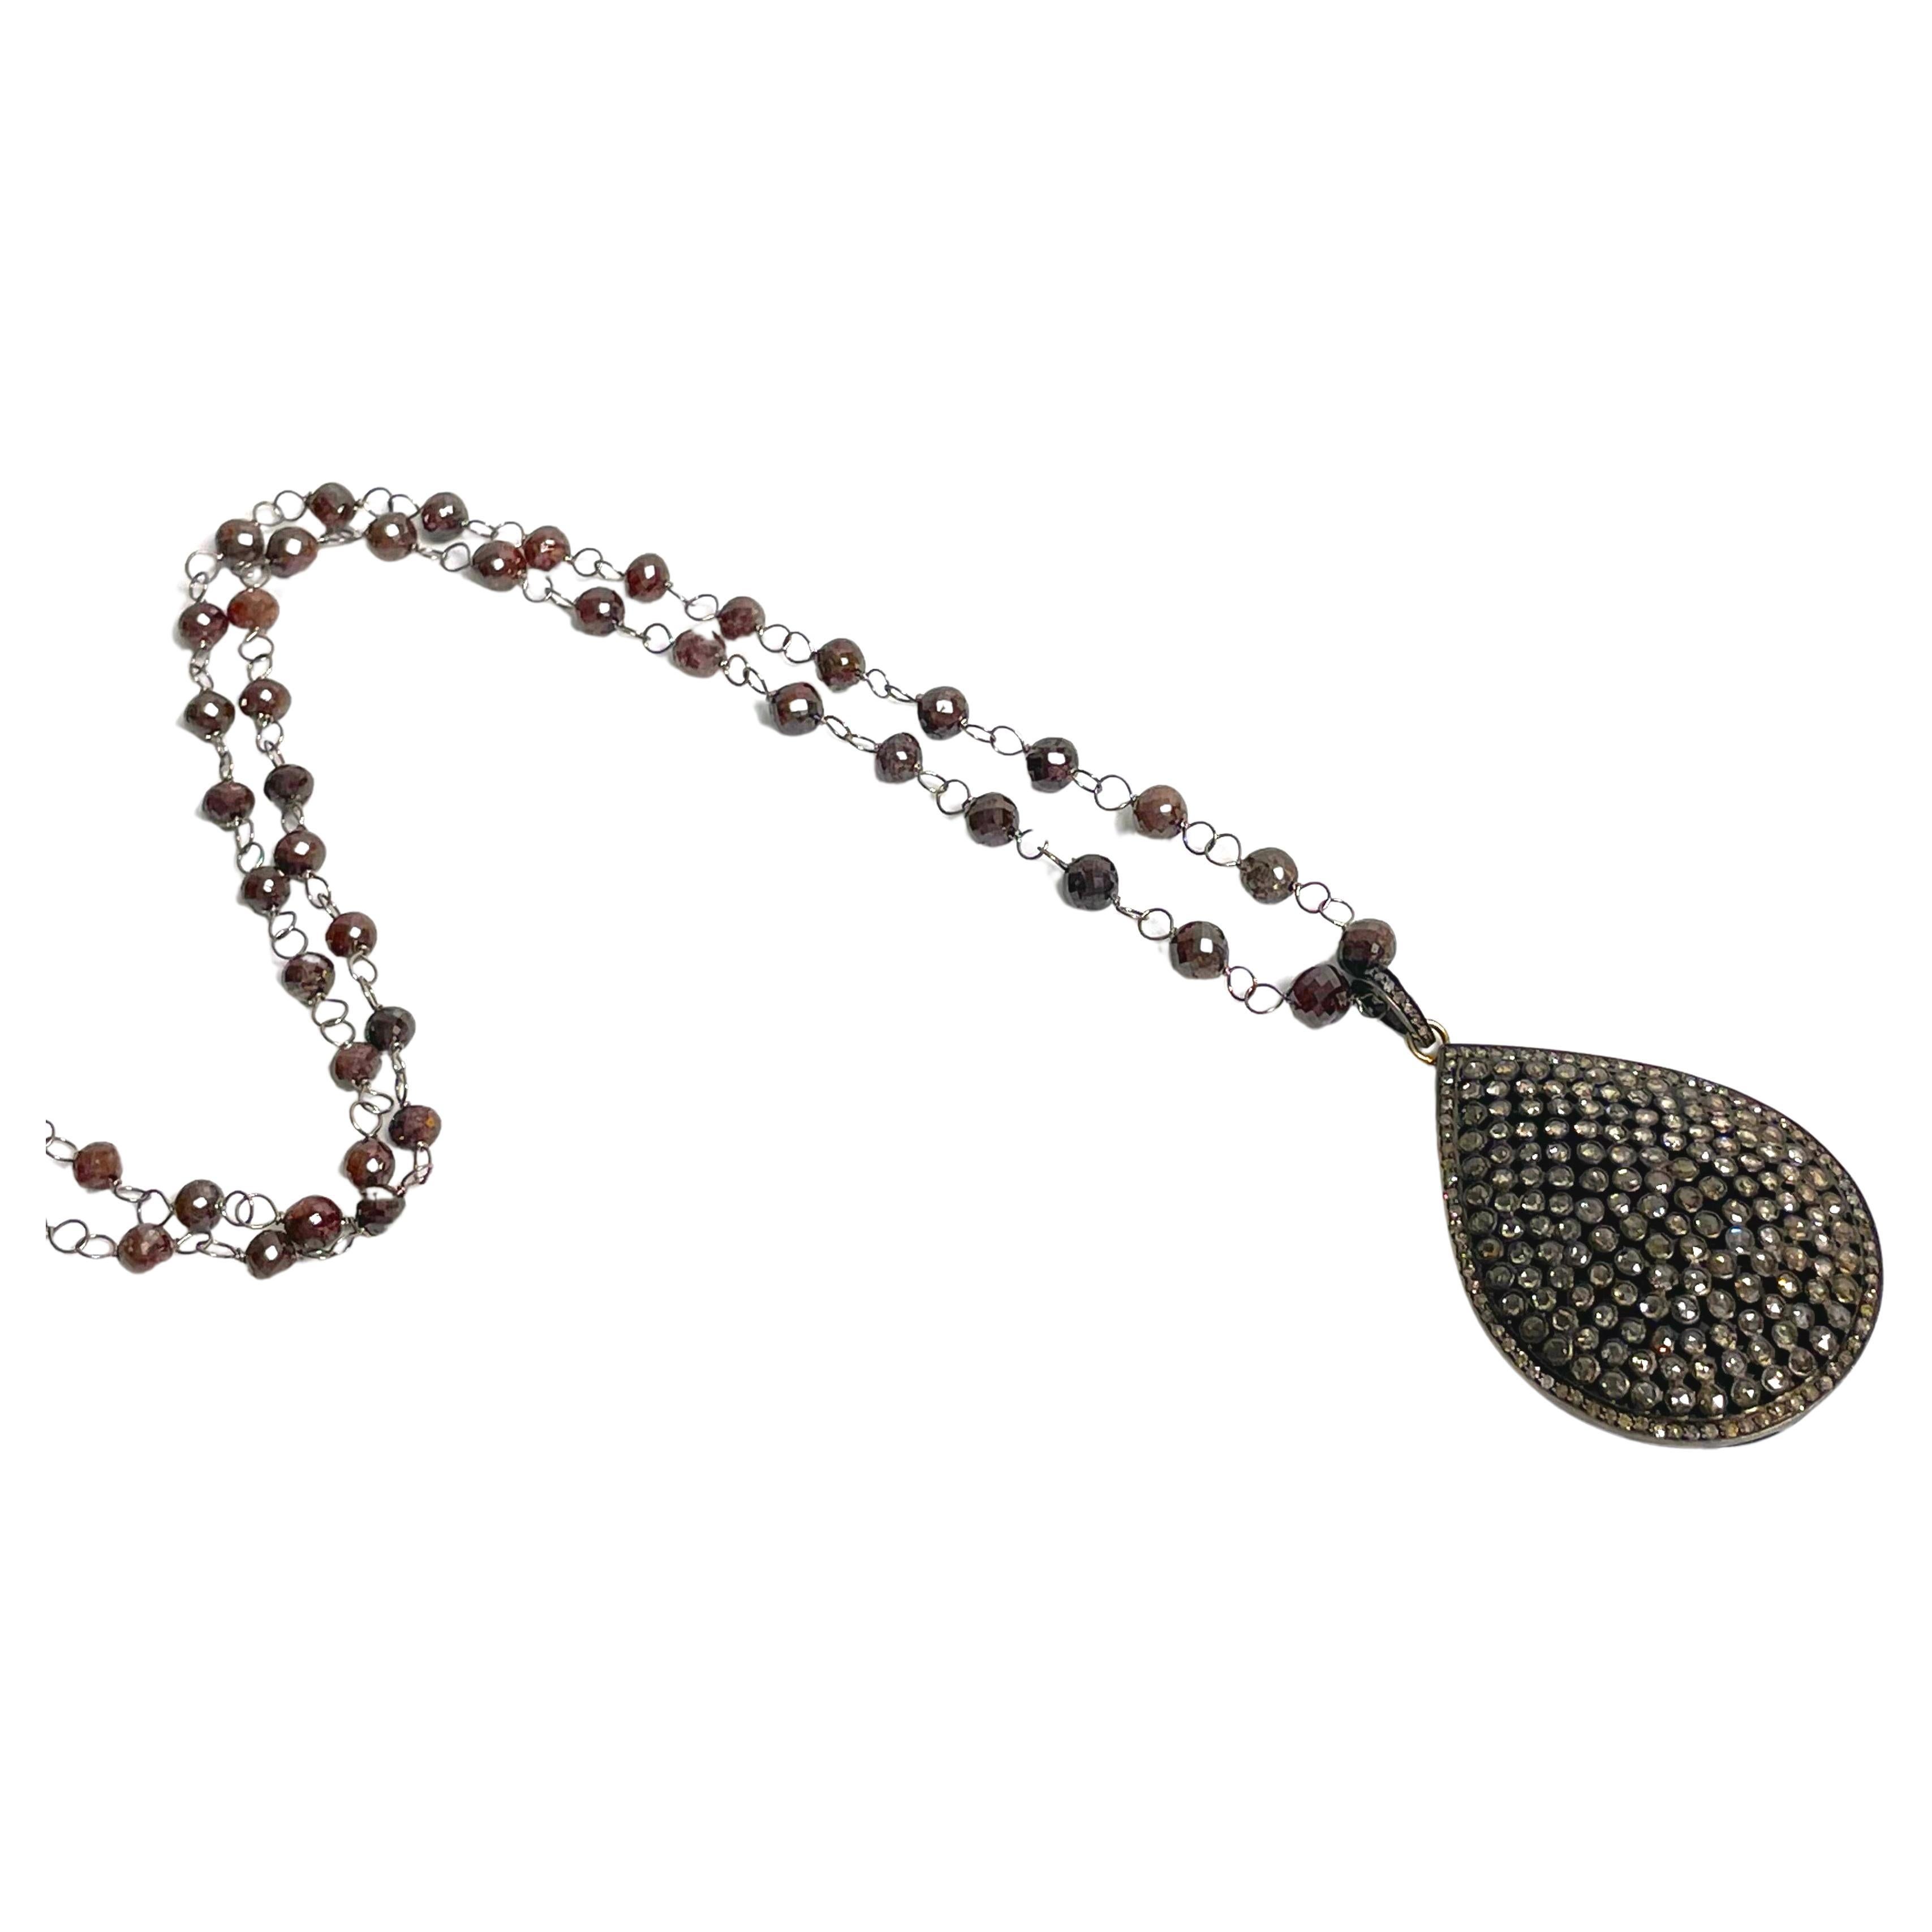 70 Carats Brown Diamonds with 7 Carats Champagne Diamonds Pendant Necklace For Sale 2